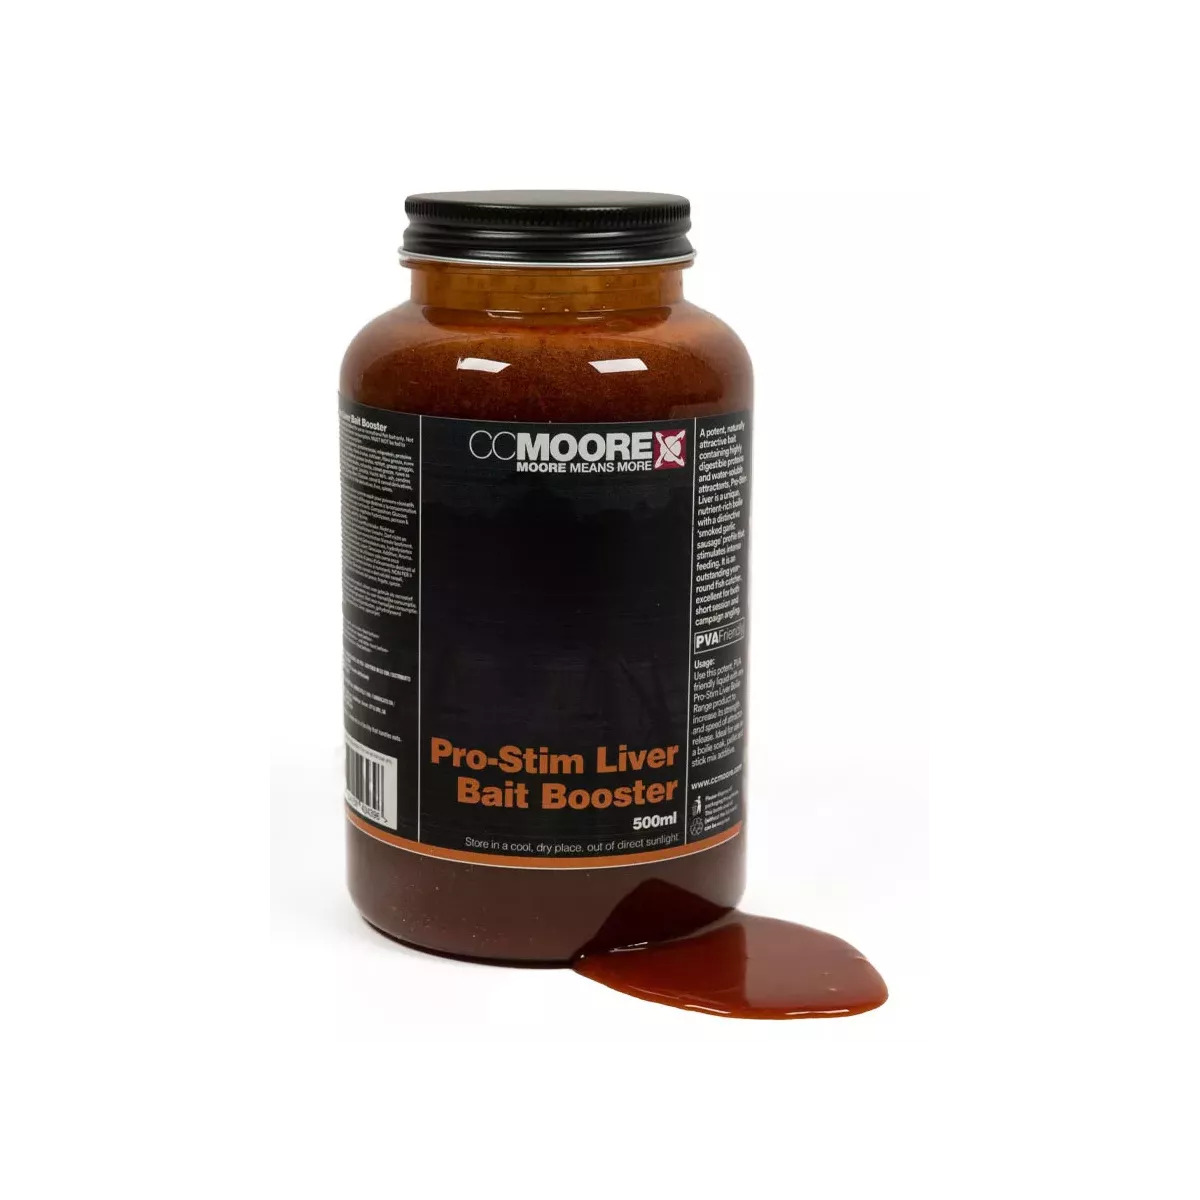 95166 Booster CC Moore Bait Booster 500ml - Pro-Stim Liver